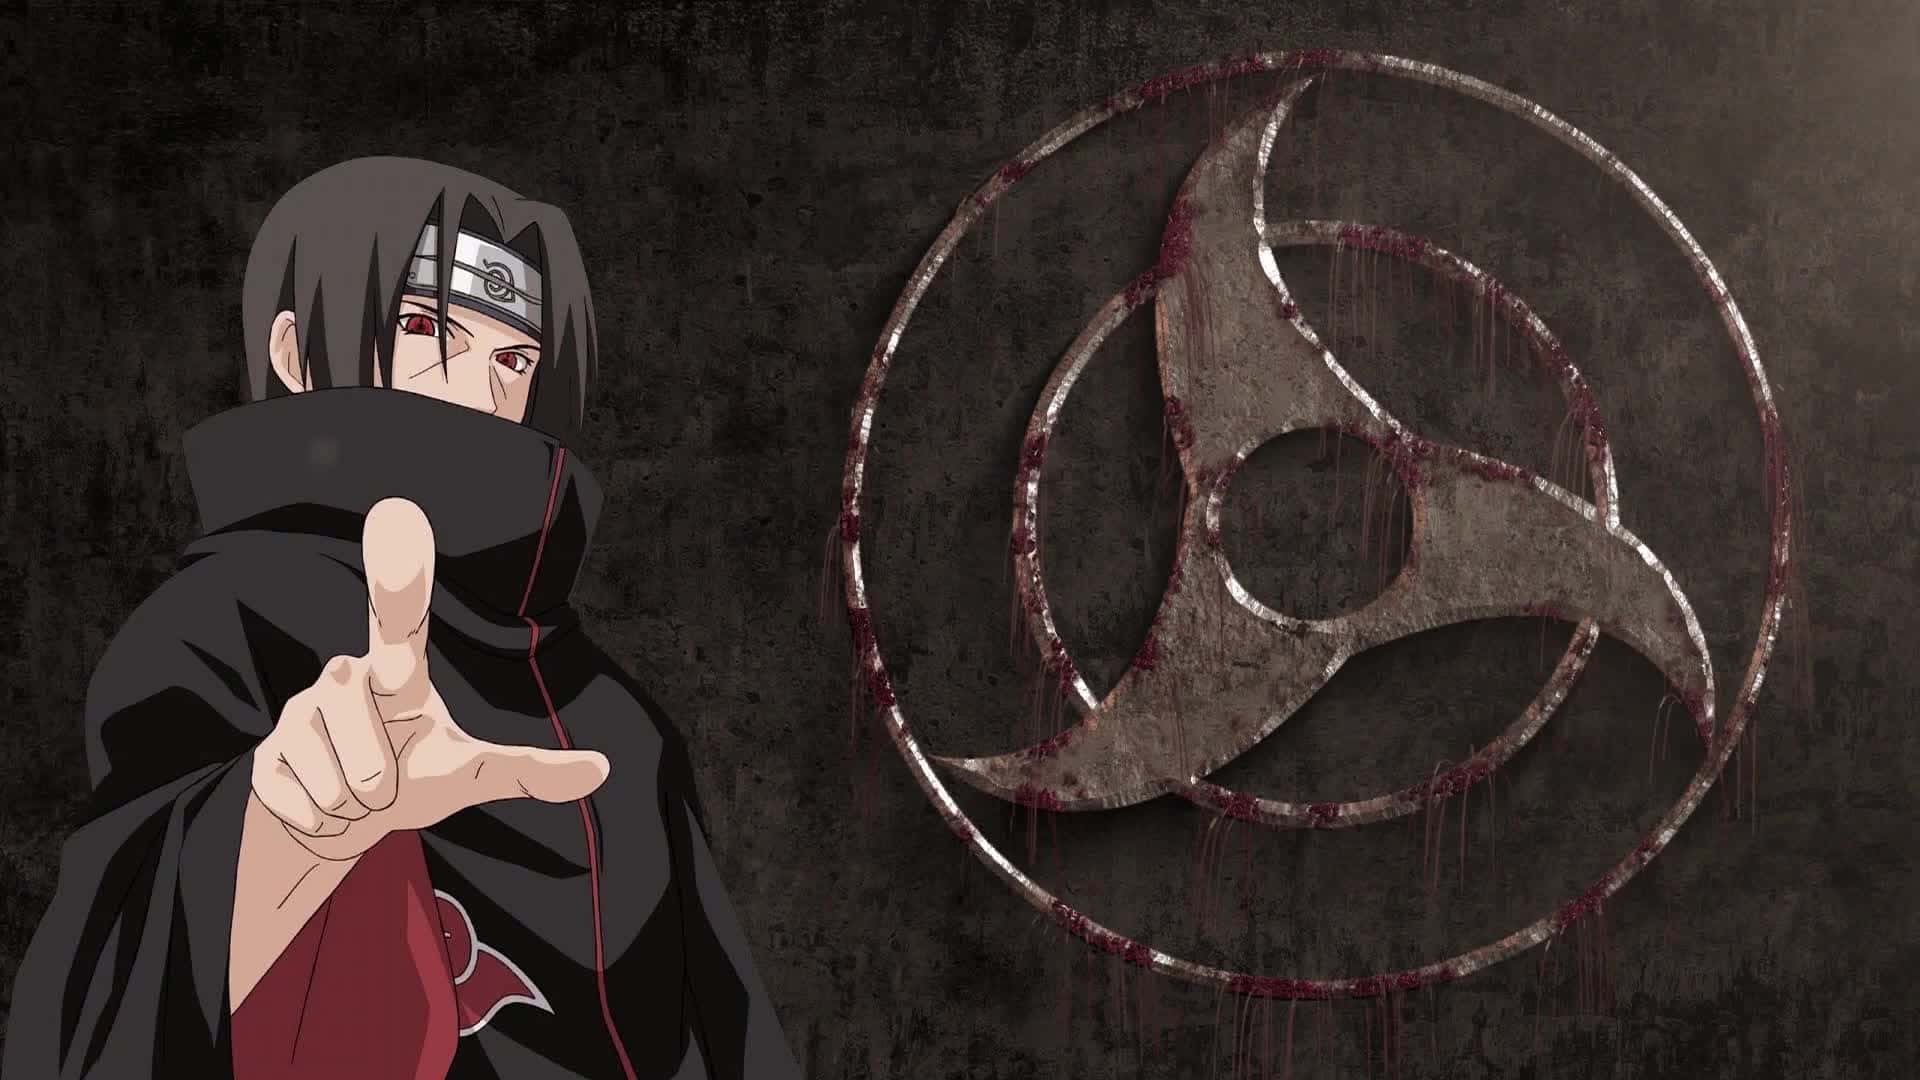 Itachimetal Sharingan Symbol Picture Can Be Translated To 